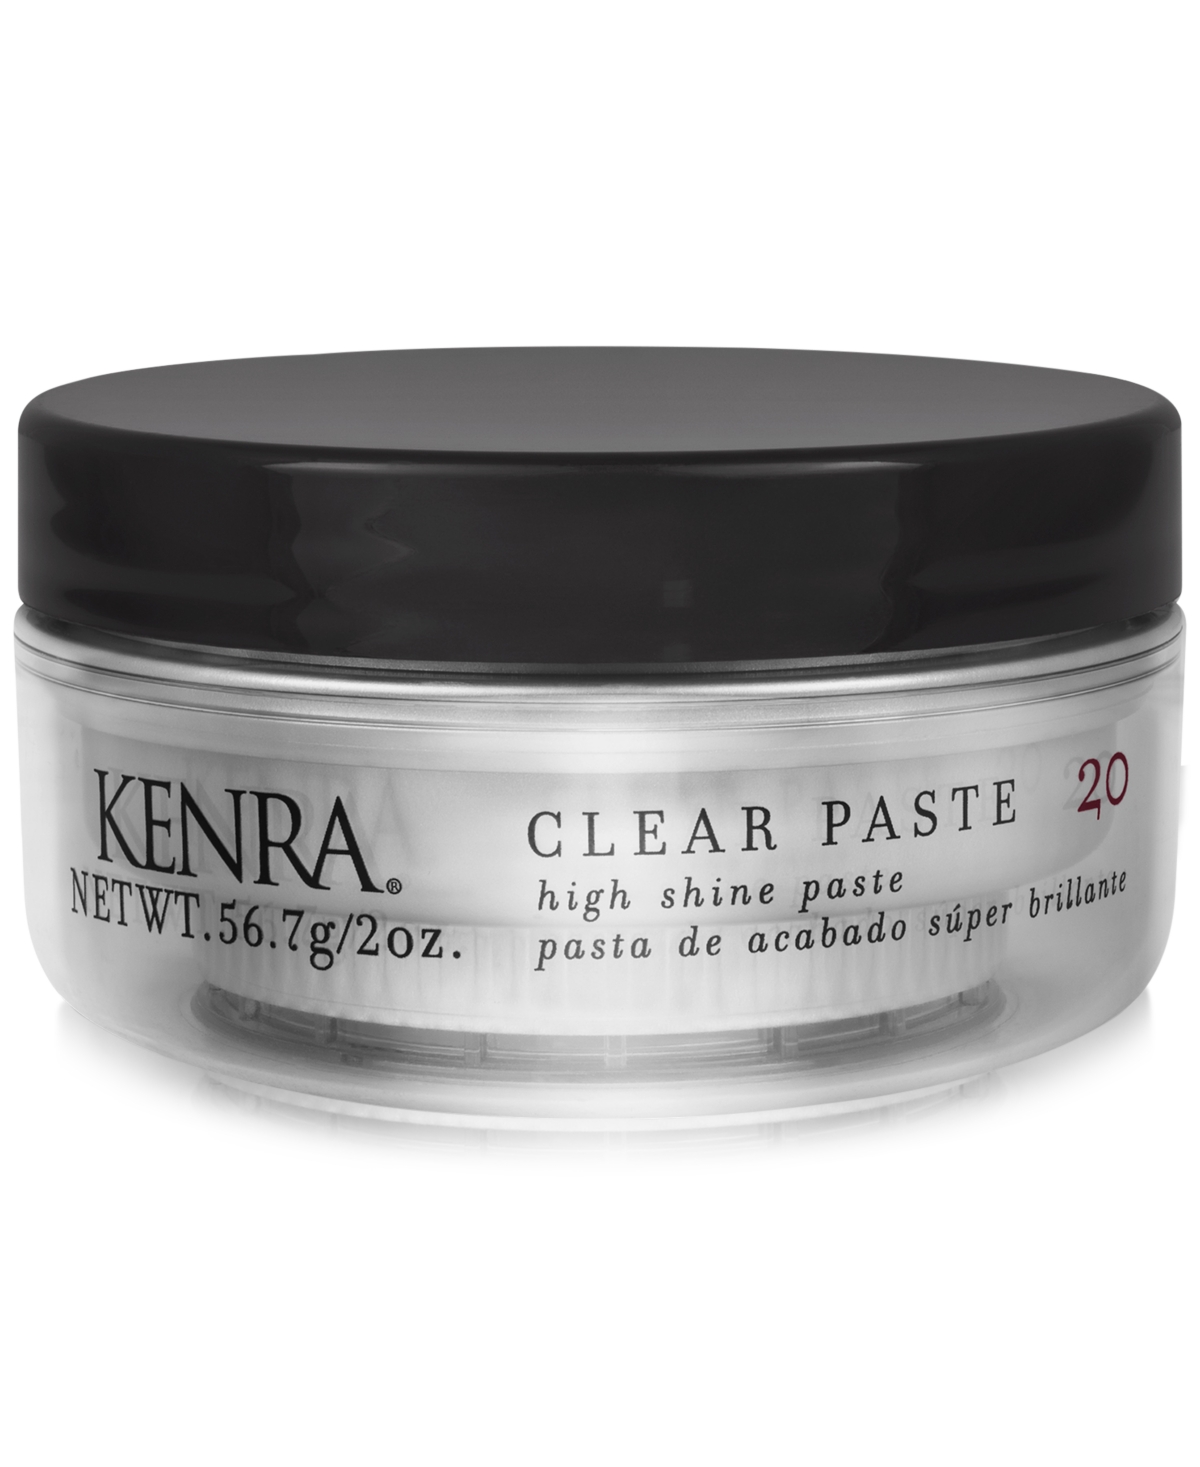 UPC 014926102021 product image for Kenra Professional Clear Paste 20, 2-oz, from Purebeauty Salon & Spa | upcitemdb.com